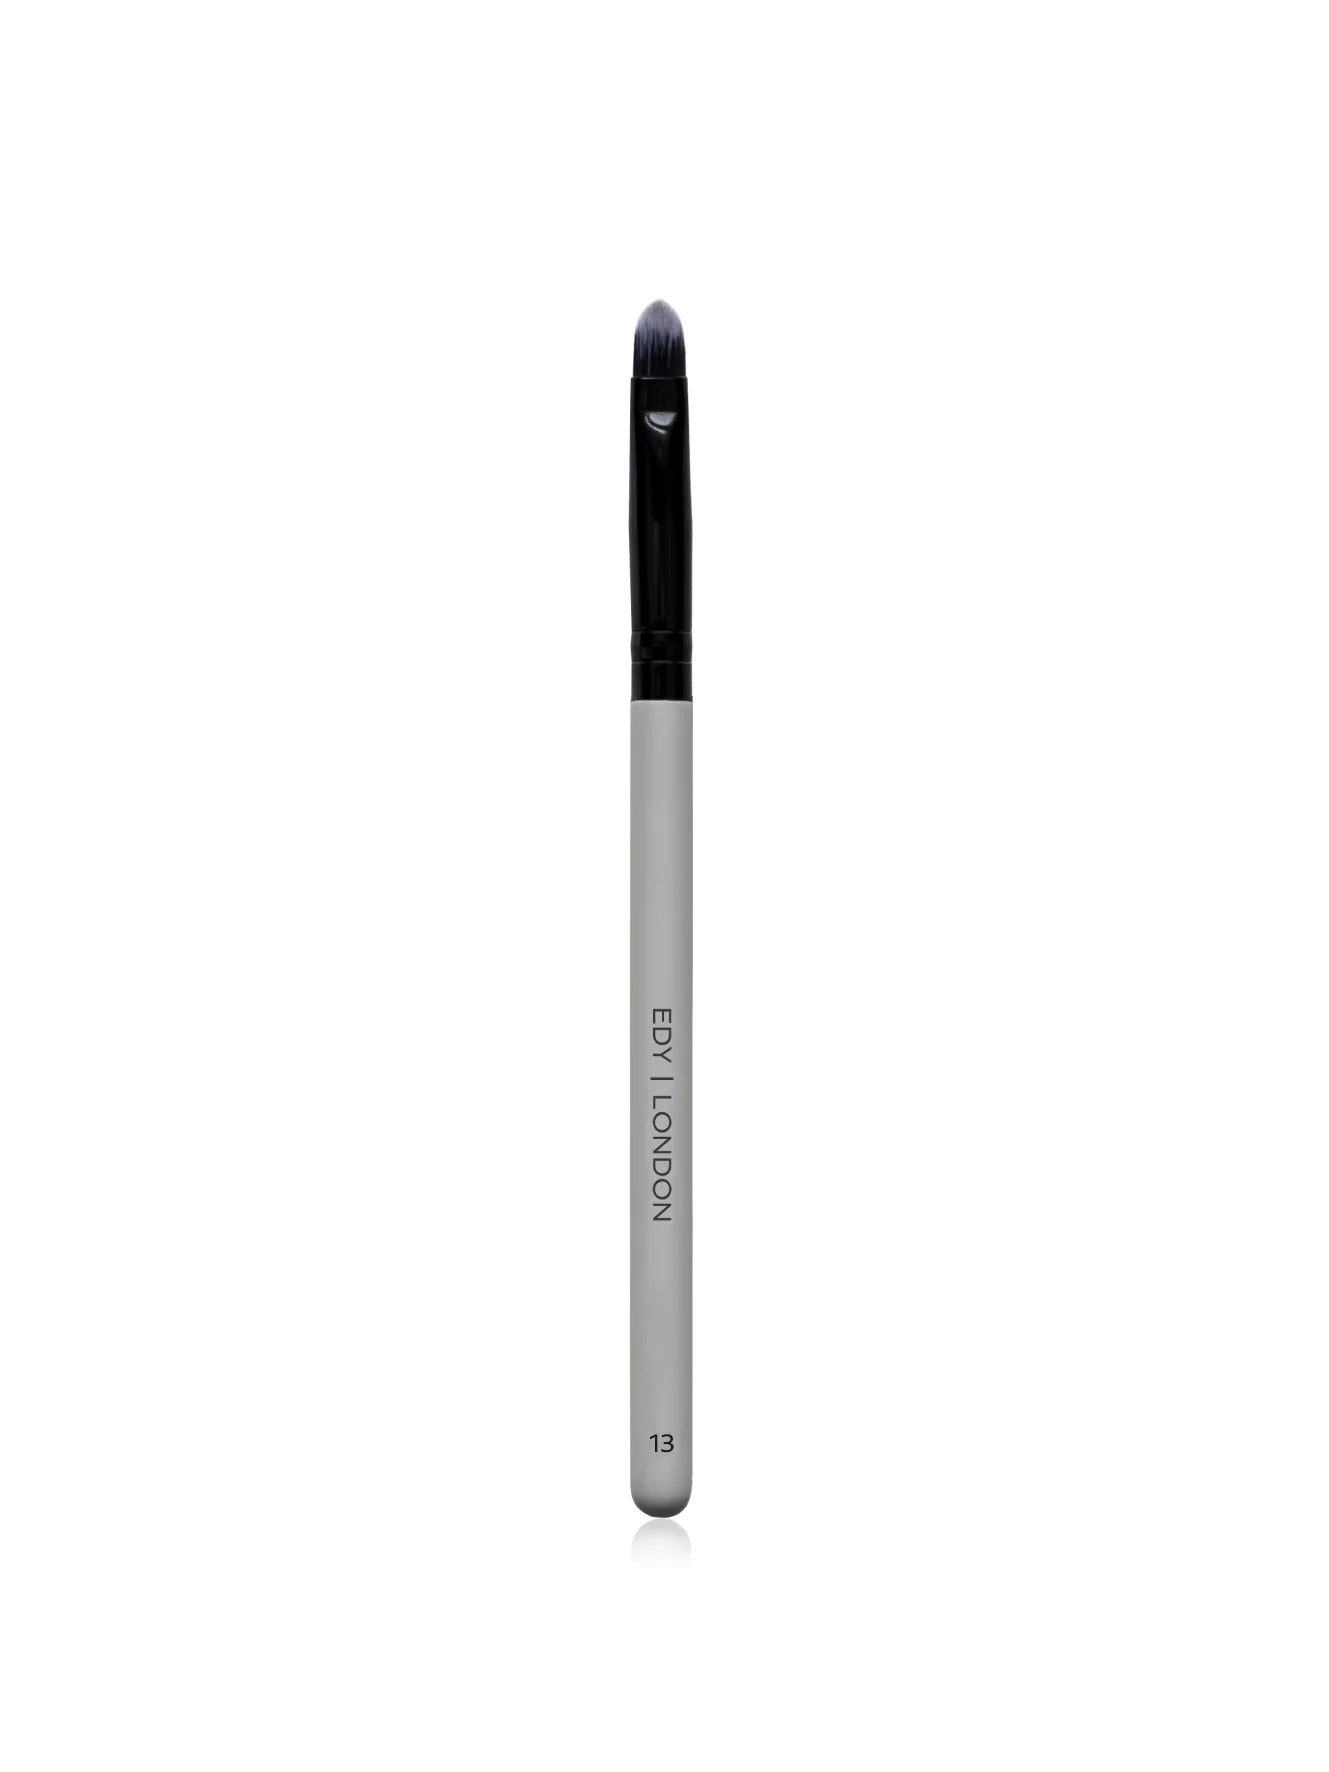 Precision Pencil / Shader Brush 13 Make-up Brush EDY LONDON Cool Grey   - EDY LONDON PRODUCTS UK - The Best Makeup Brushes - shop.edy.london